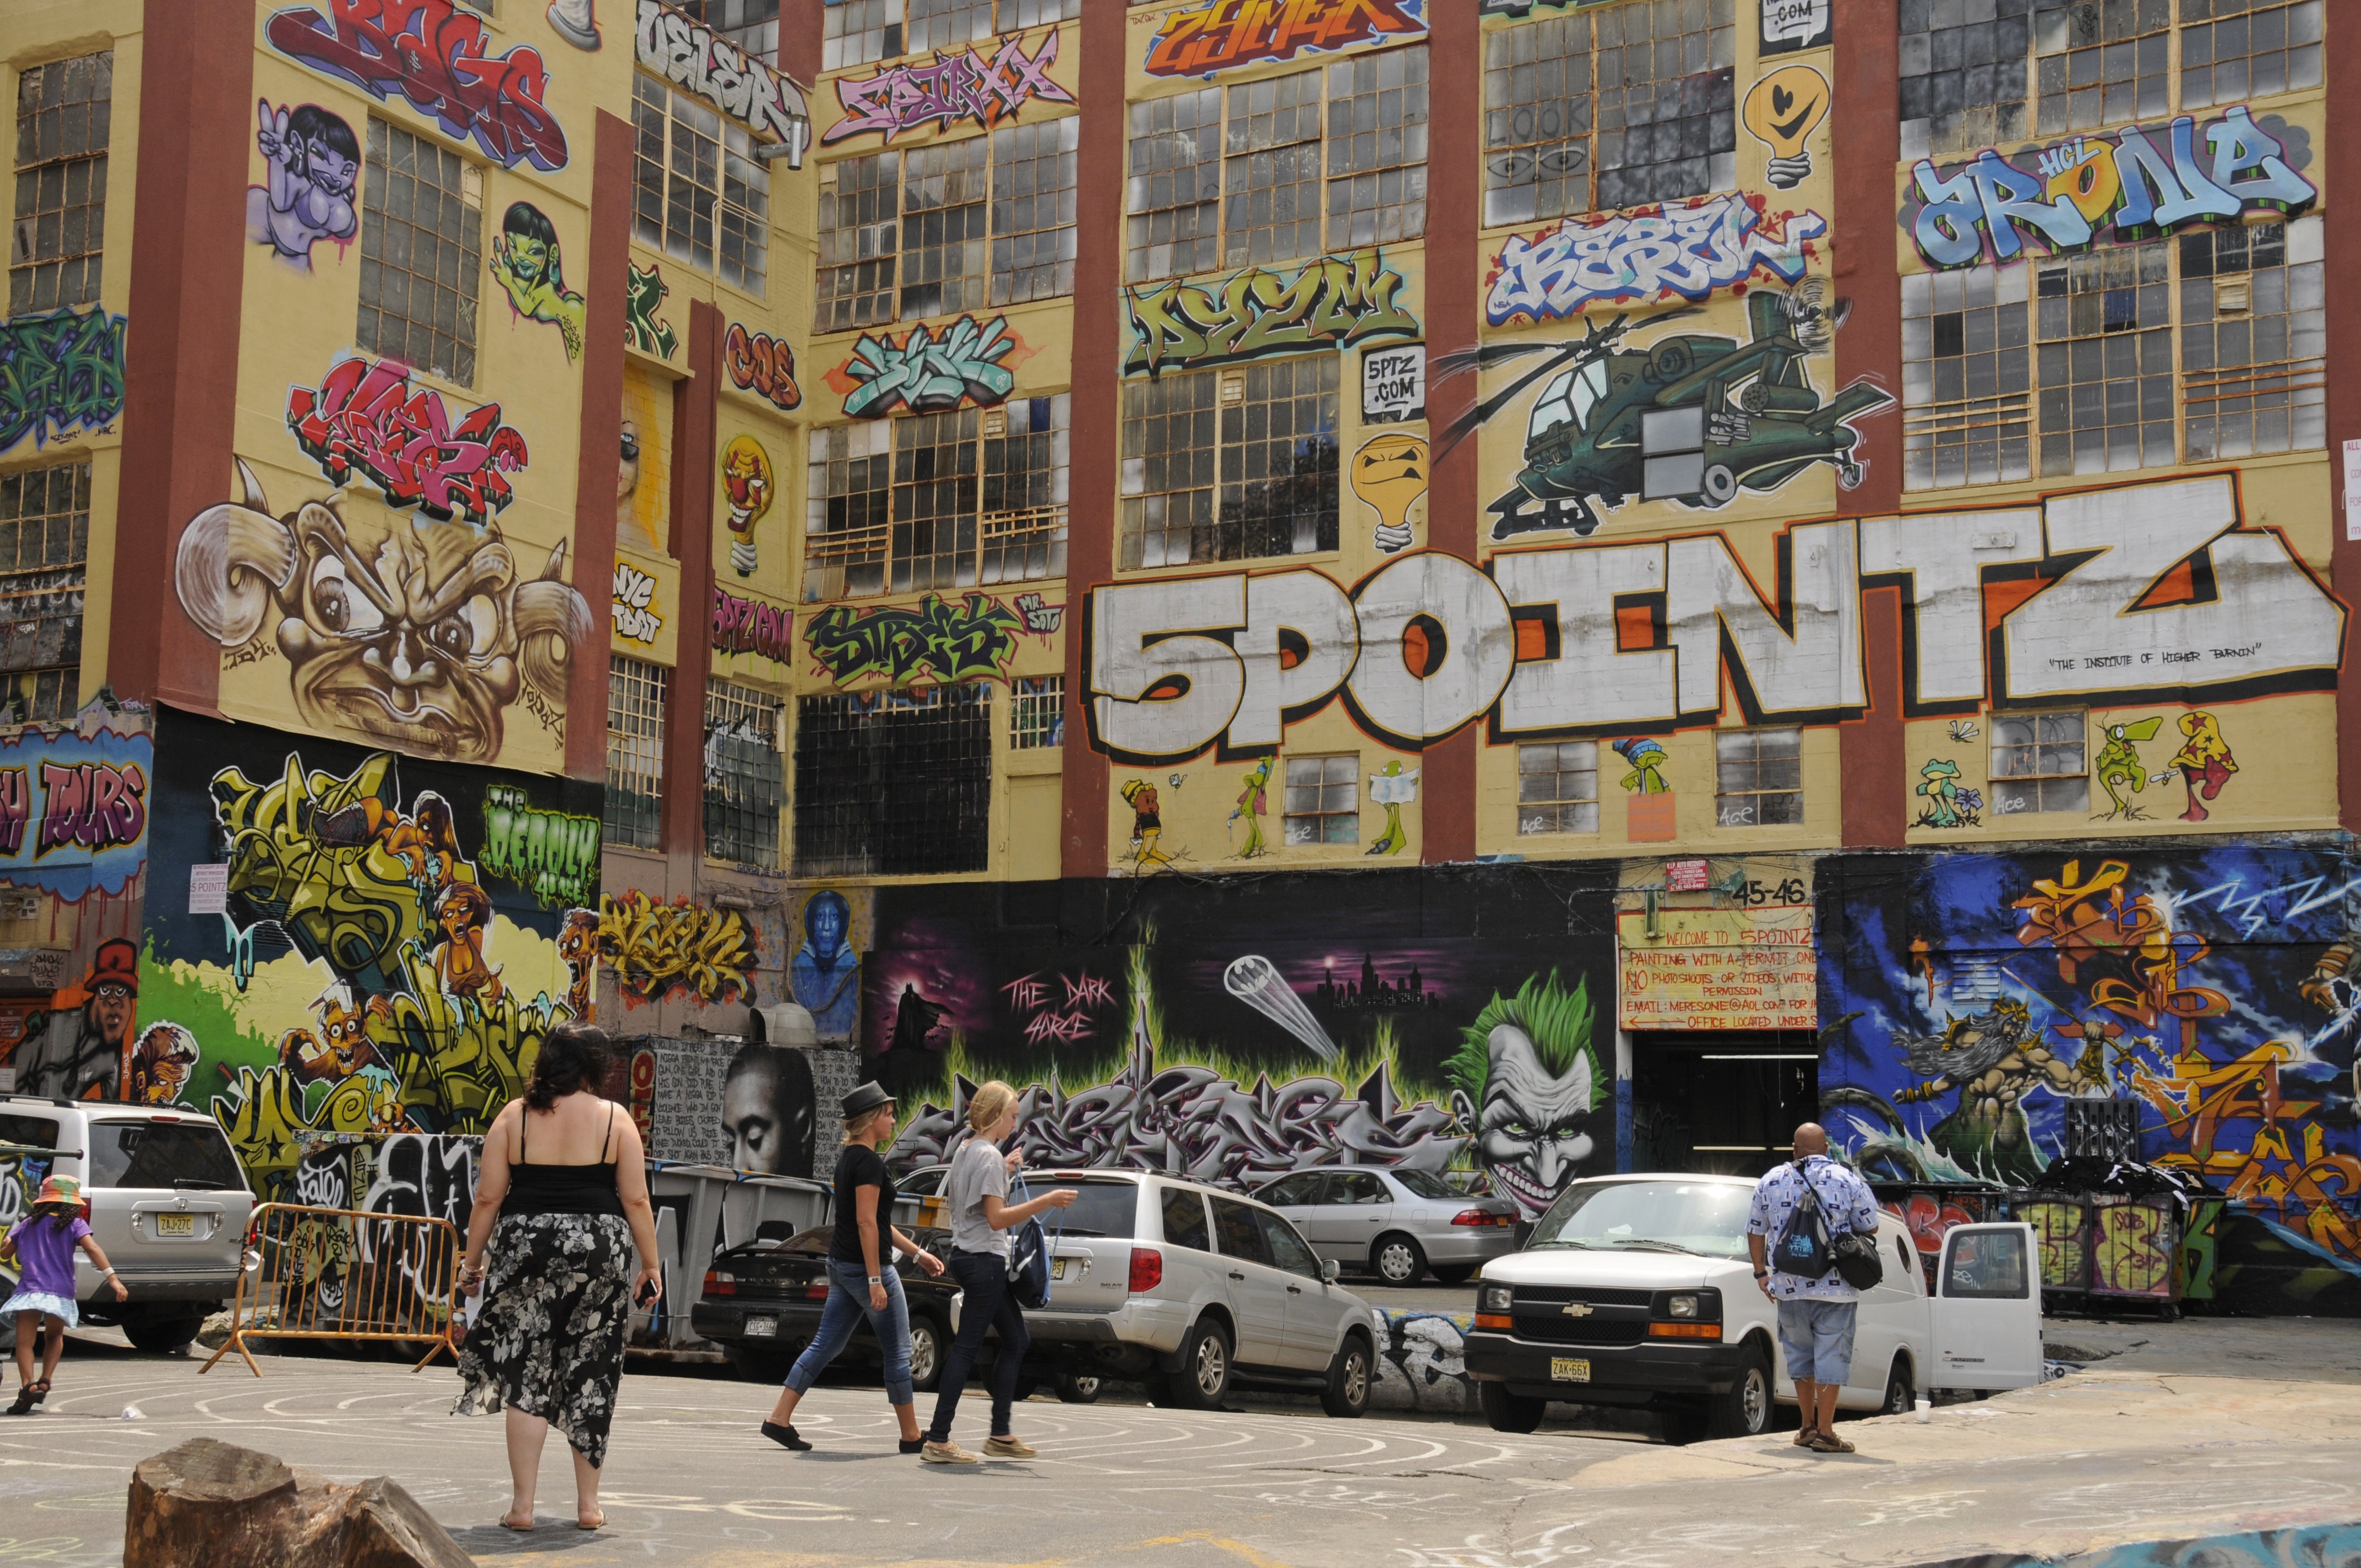 USA New York New York City - Factory building with graffitis, '5Pointz' is an outdoor art exhibit space for graffiti artists